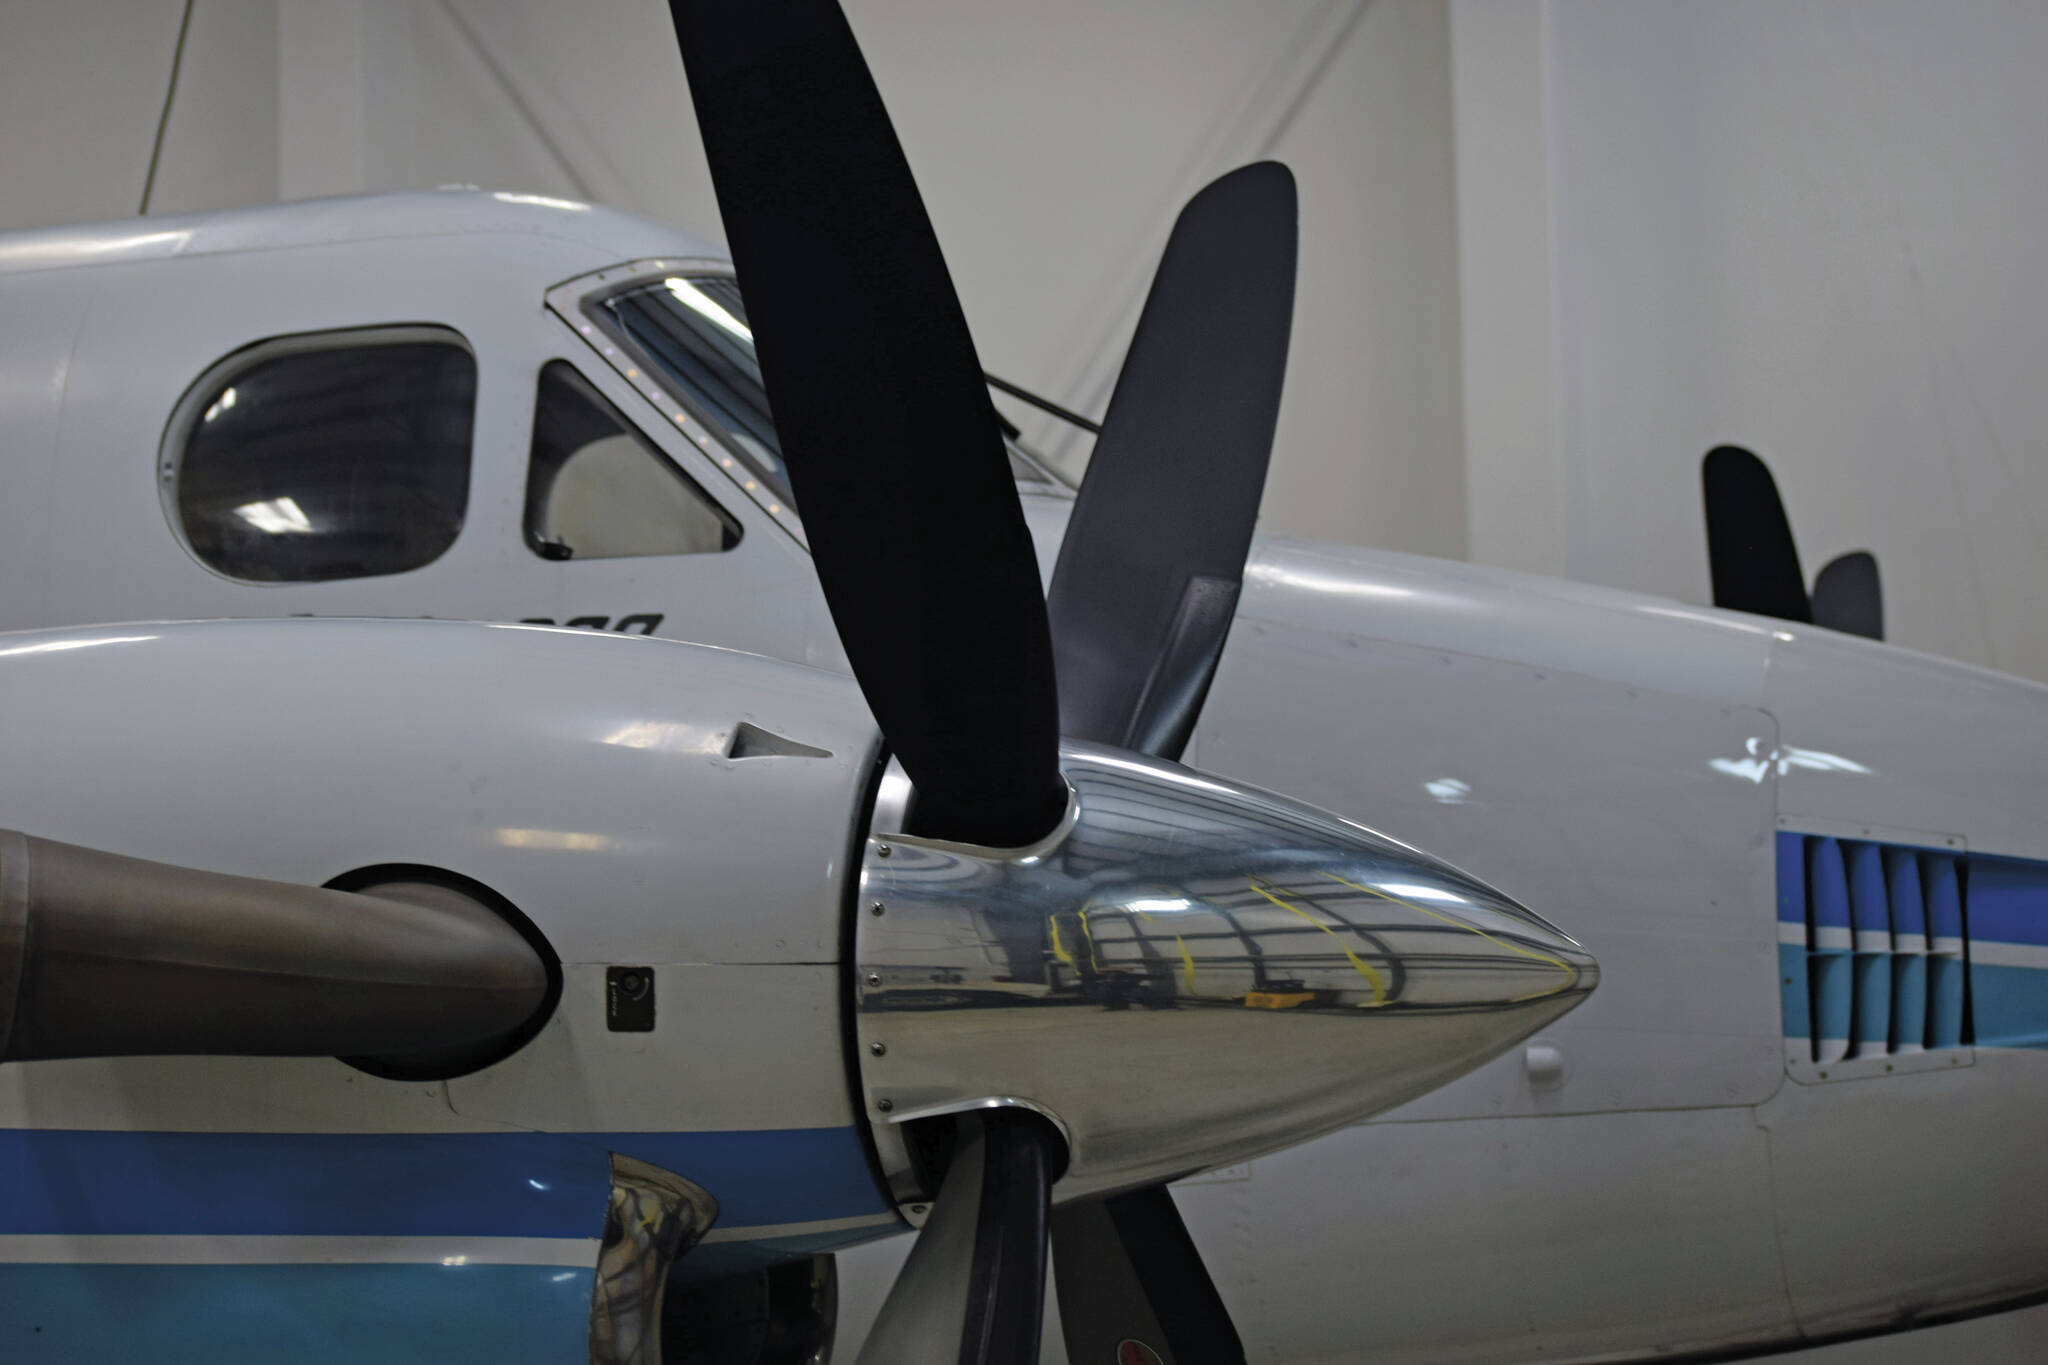 A nine-seat Beechcrafter Super King Air B200 plane sits in a hanger at Kenai Aviation in Kenai, Alaska on Wednesday, March 9, 2022. (Camille Botello/Peninsula Clarion)